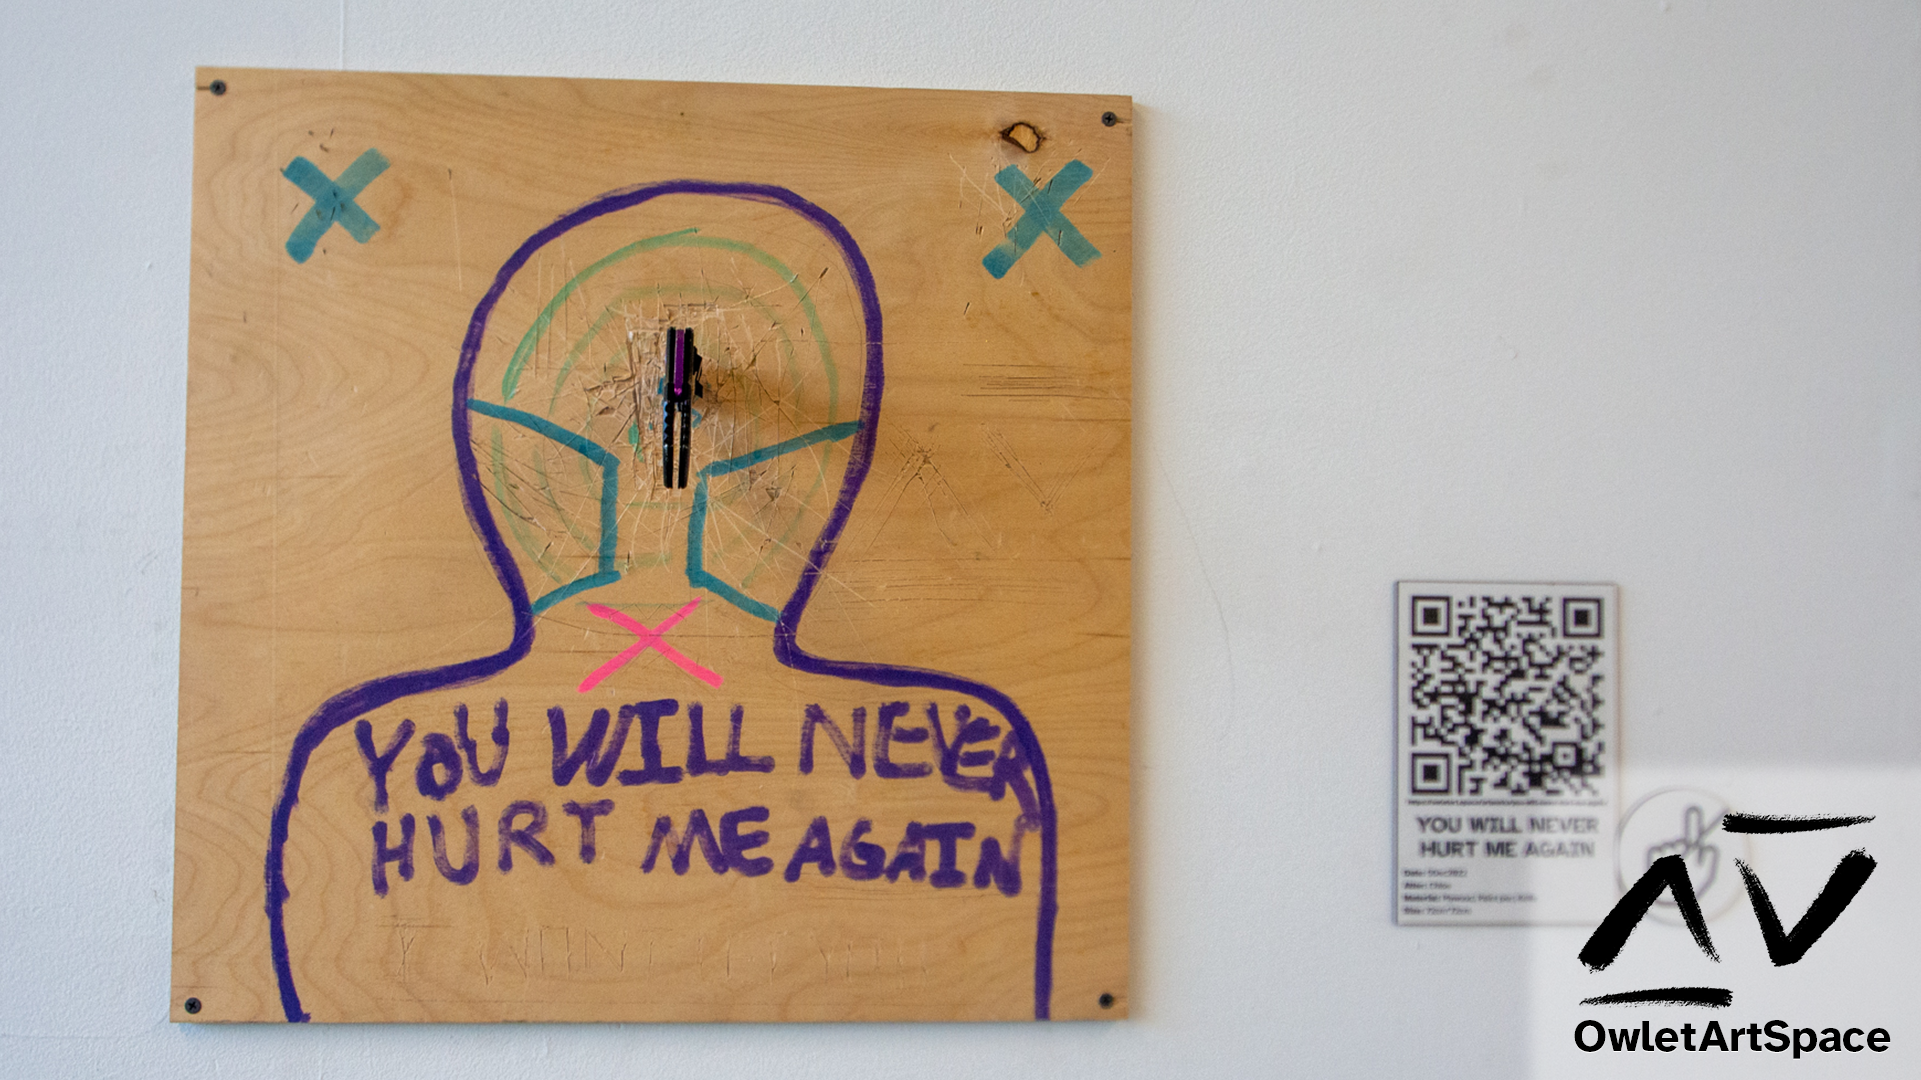 The piece YOU WILL NEVER HURT ME AGAIN. Next to it is a wall label with a QR code to the page you are currently reading.